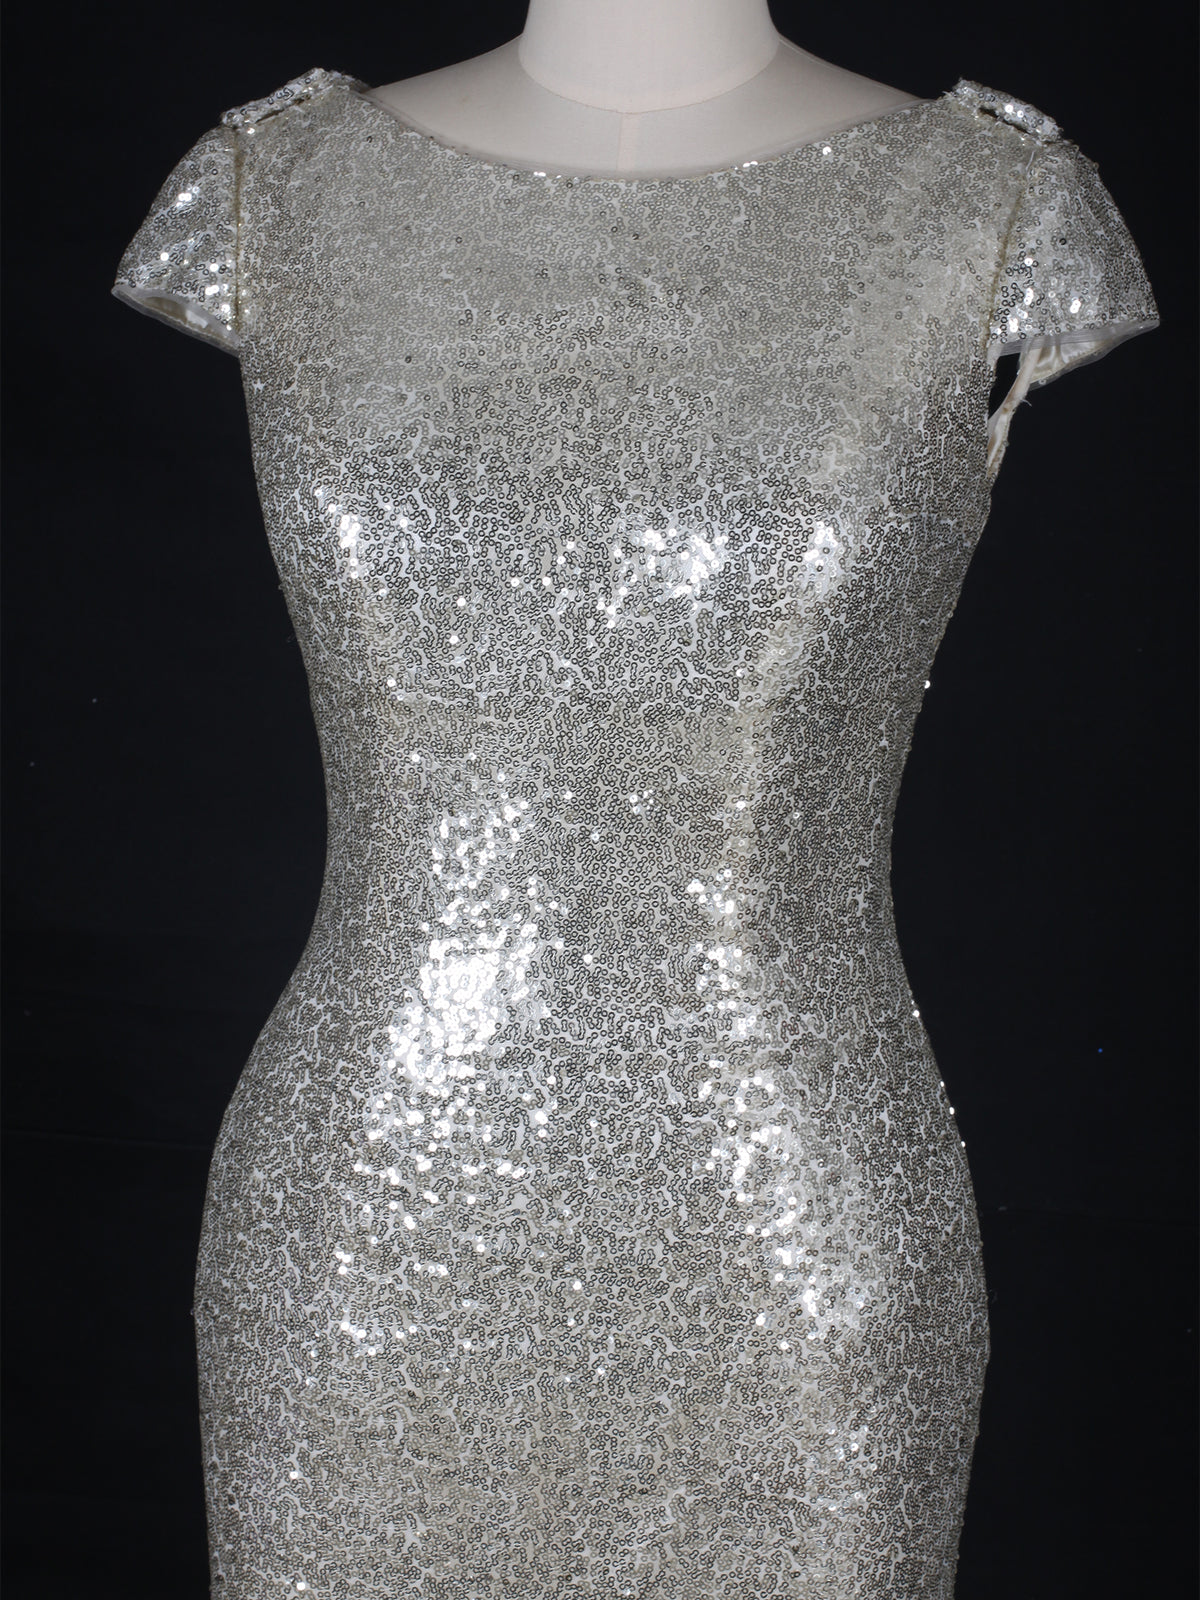 Sequin Cap Sleeve with Cowl Evening Dress